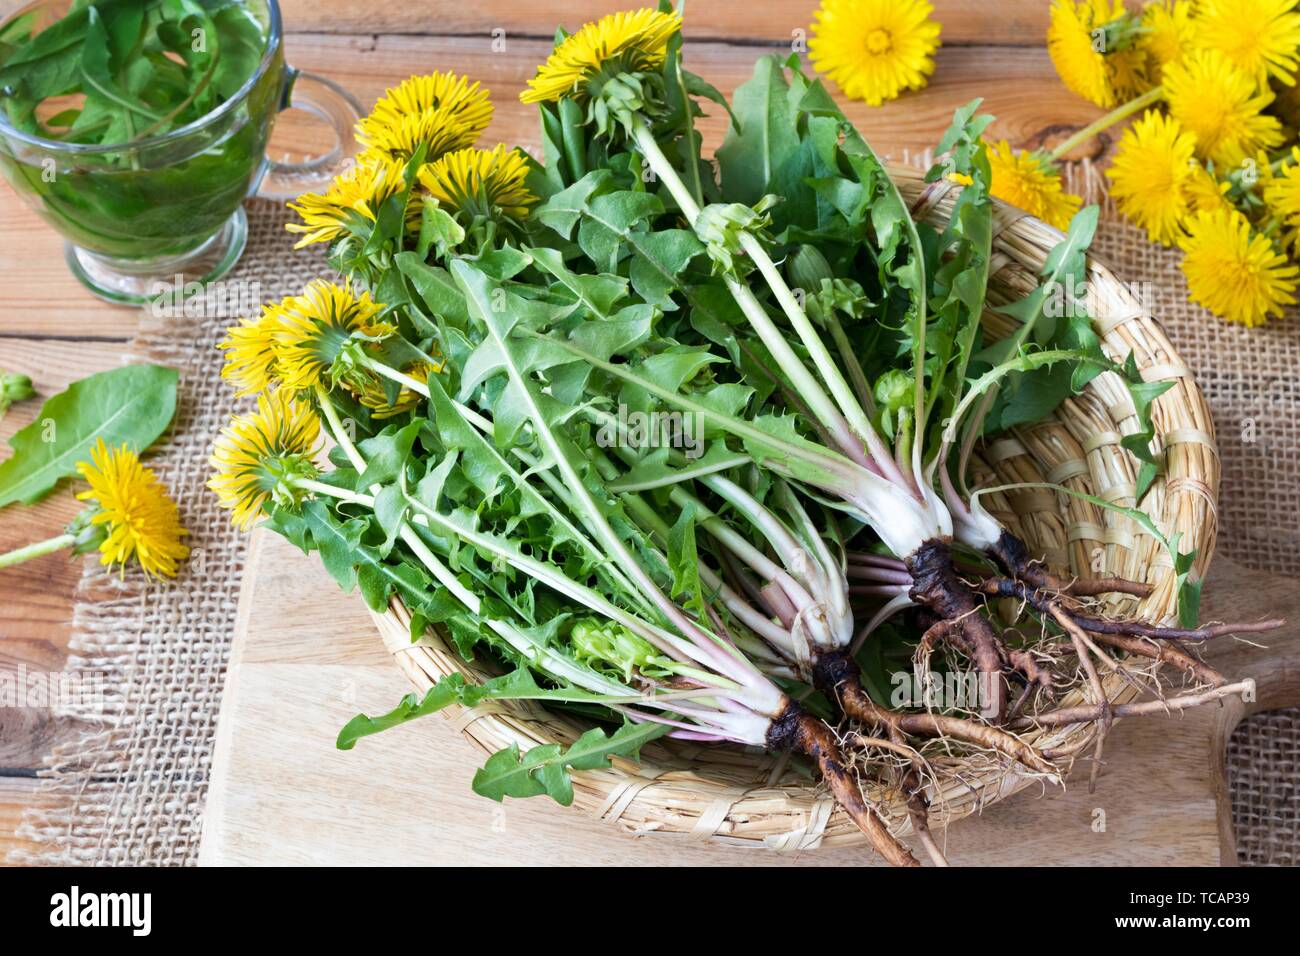 Whole dandelion plants with roots in a wicker basket. Stock Photo